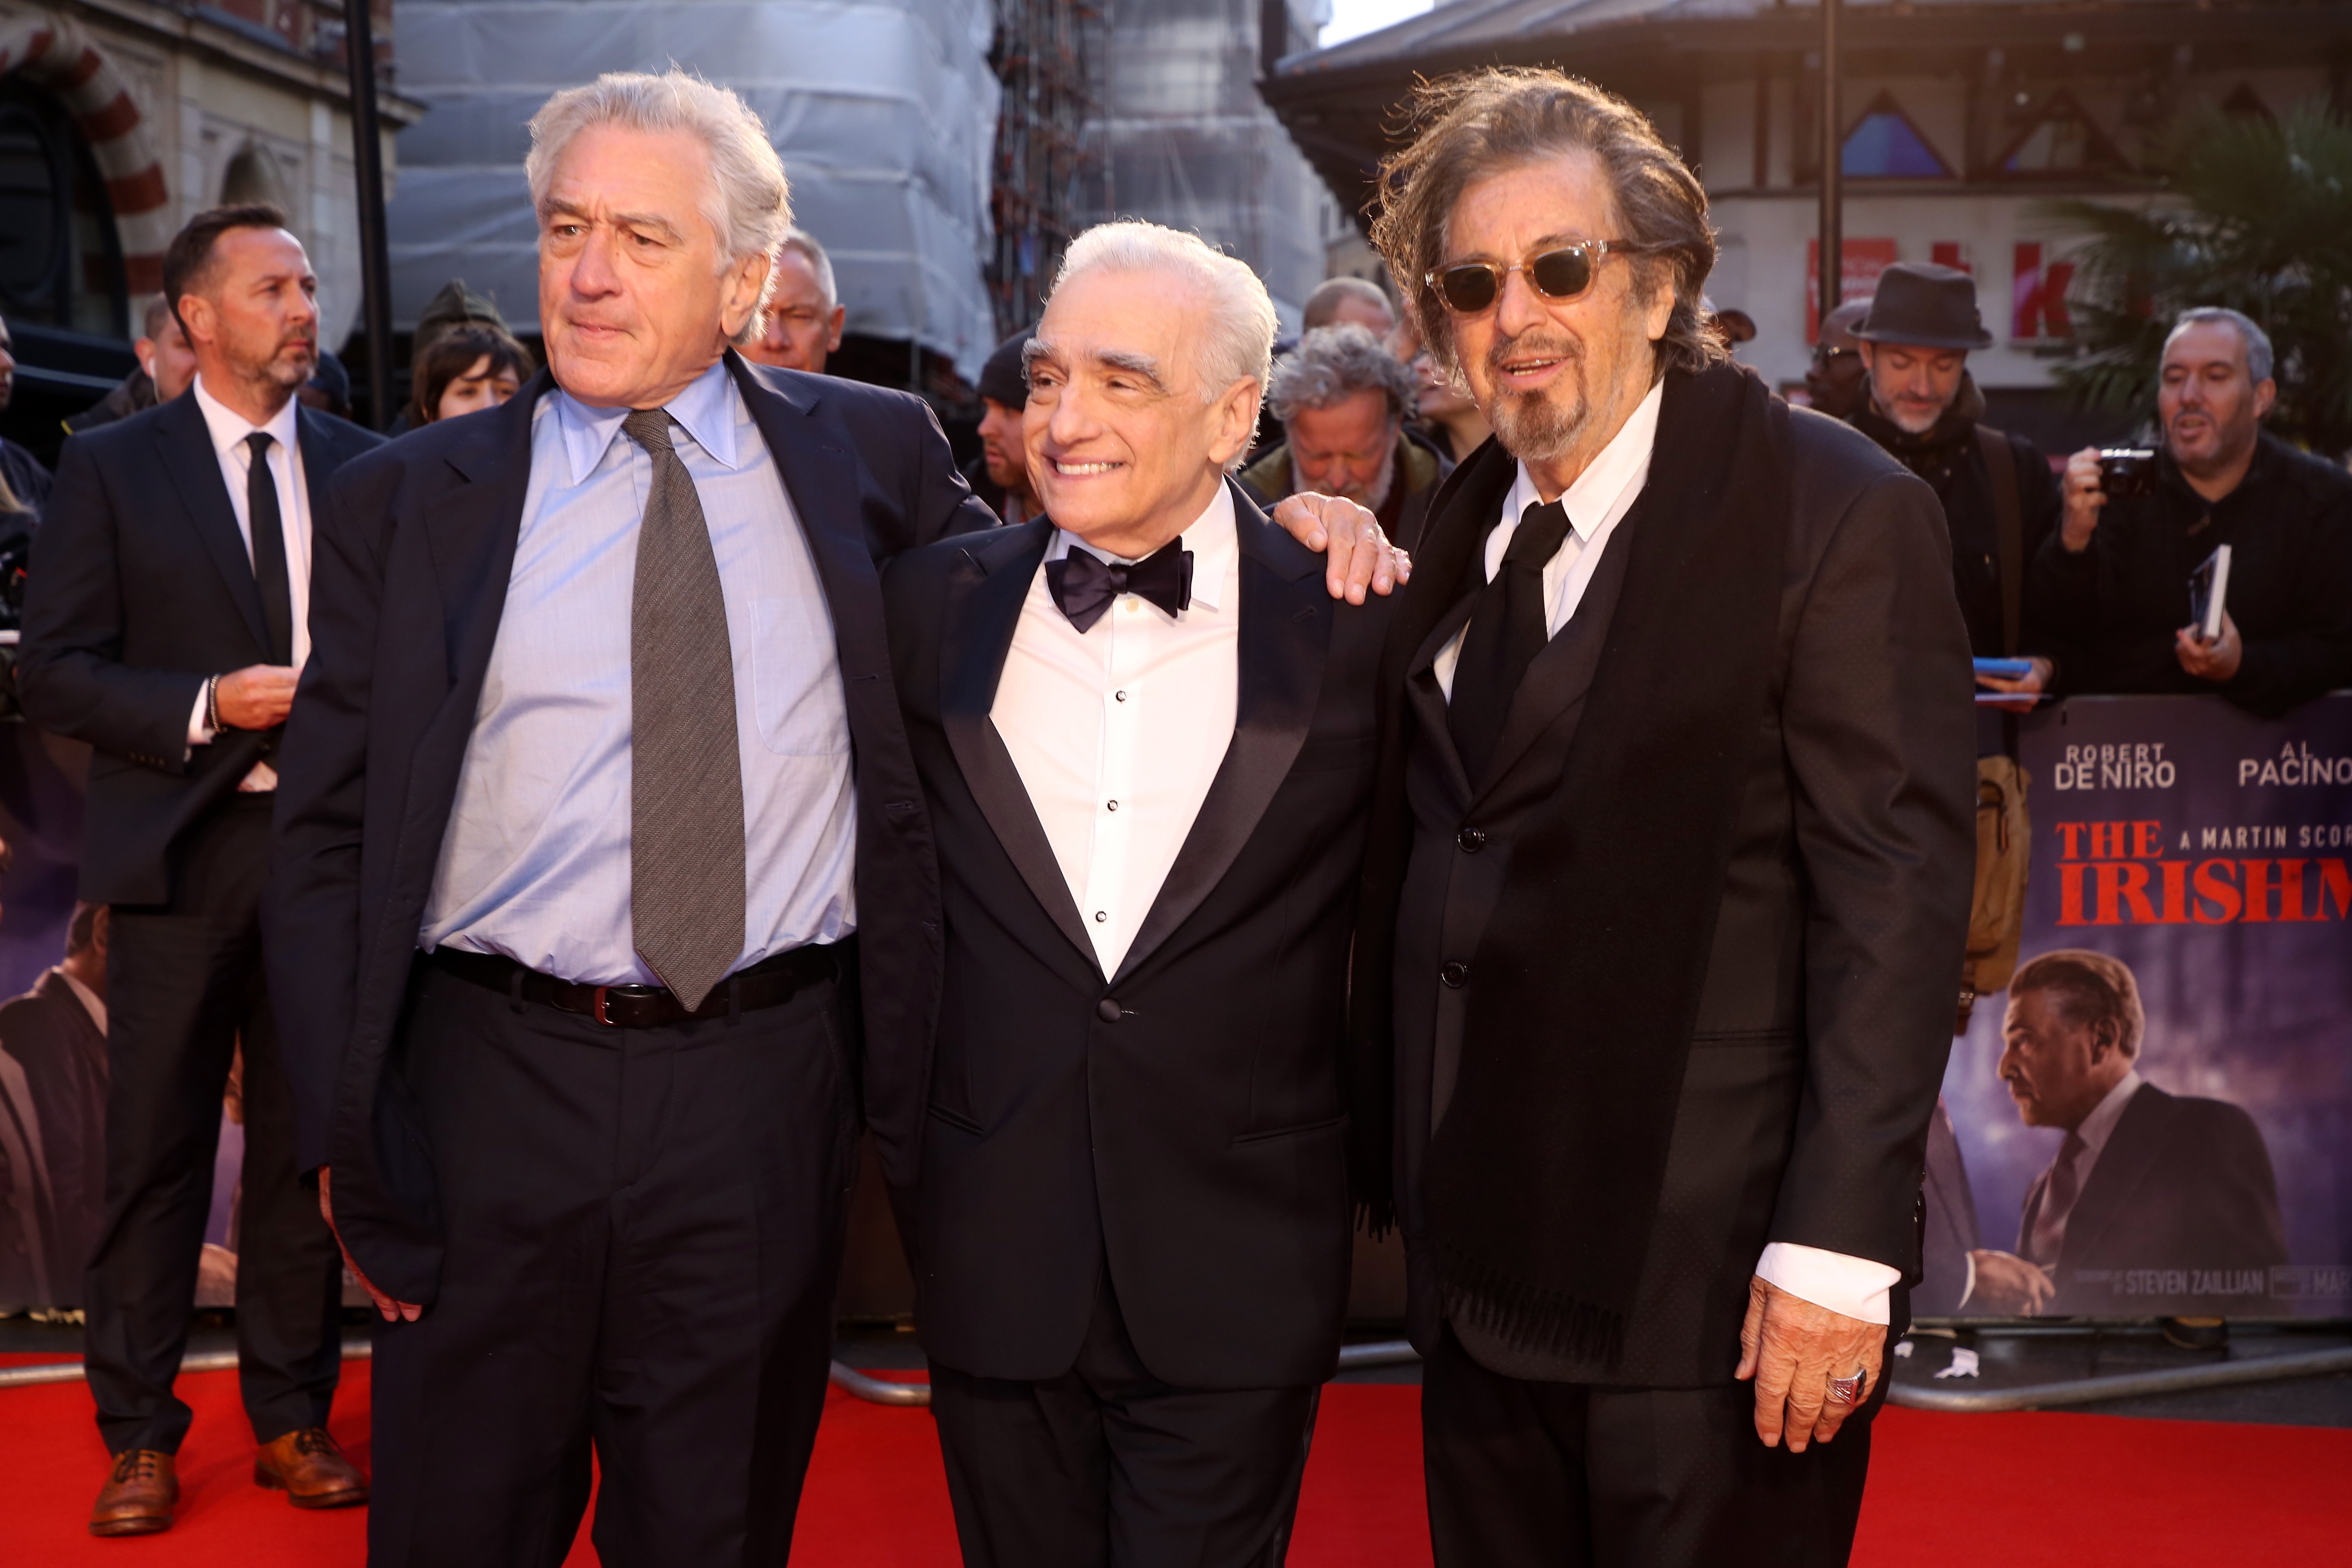 Robert De Niro, Martin Scorsese and Al Pacino attend "The Irishman" International Premiere at the Odeon Luxe Leicester Square on October 13, 2019, in London, England. | Source: Getty Images.